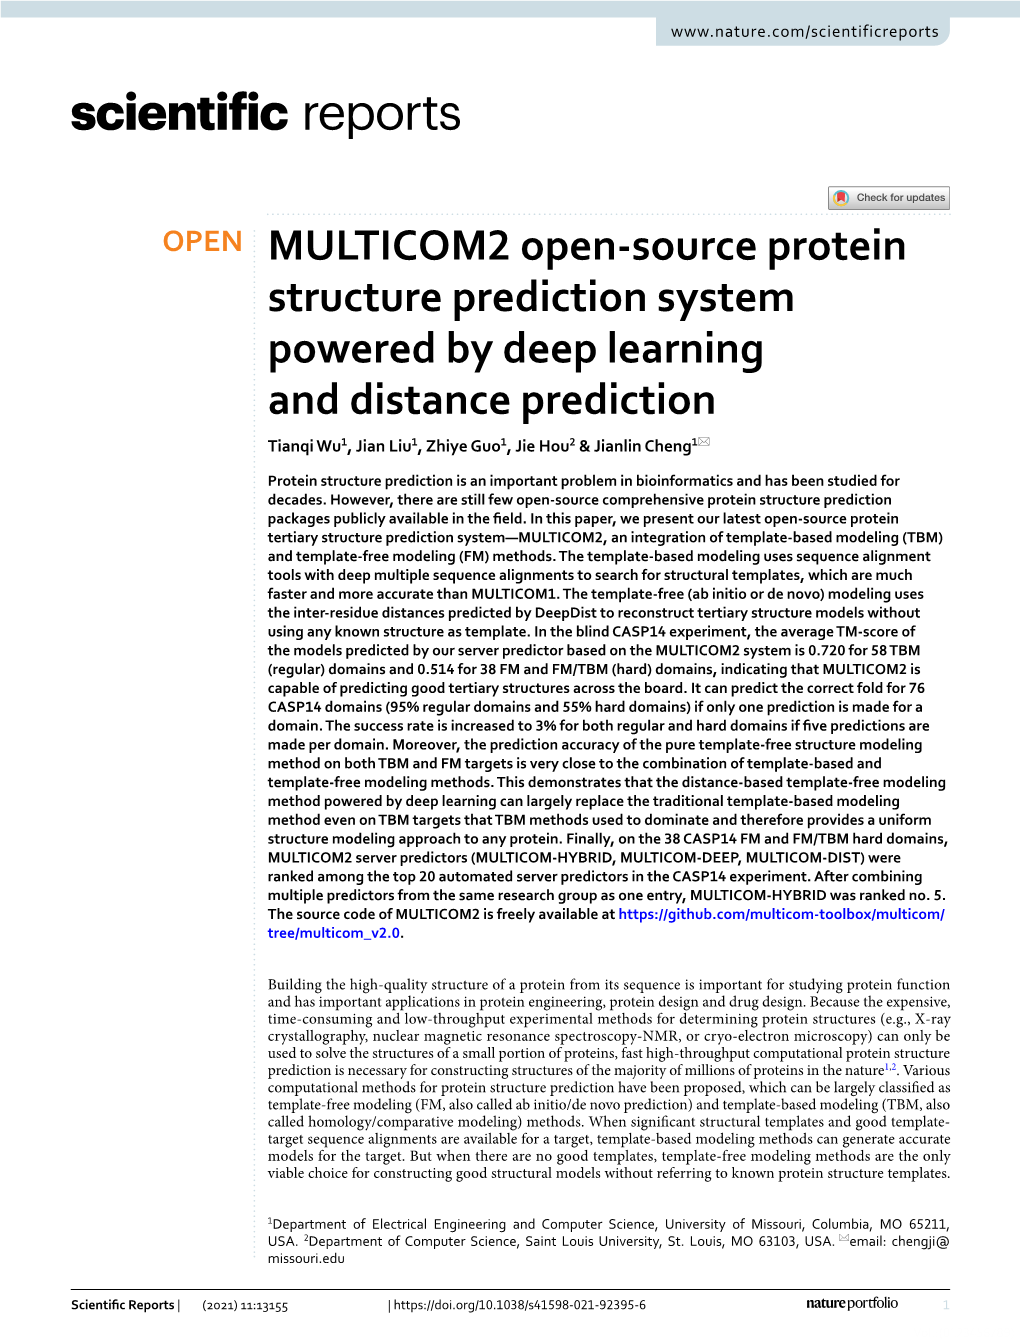 MULTICOM2 Open-Source Protein Structure Prediction System